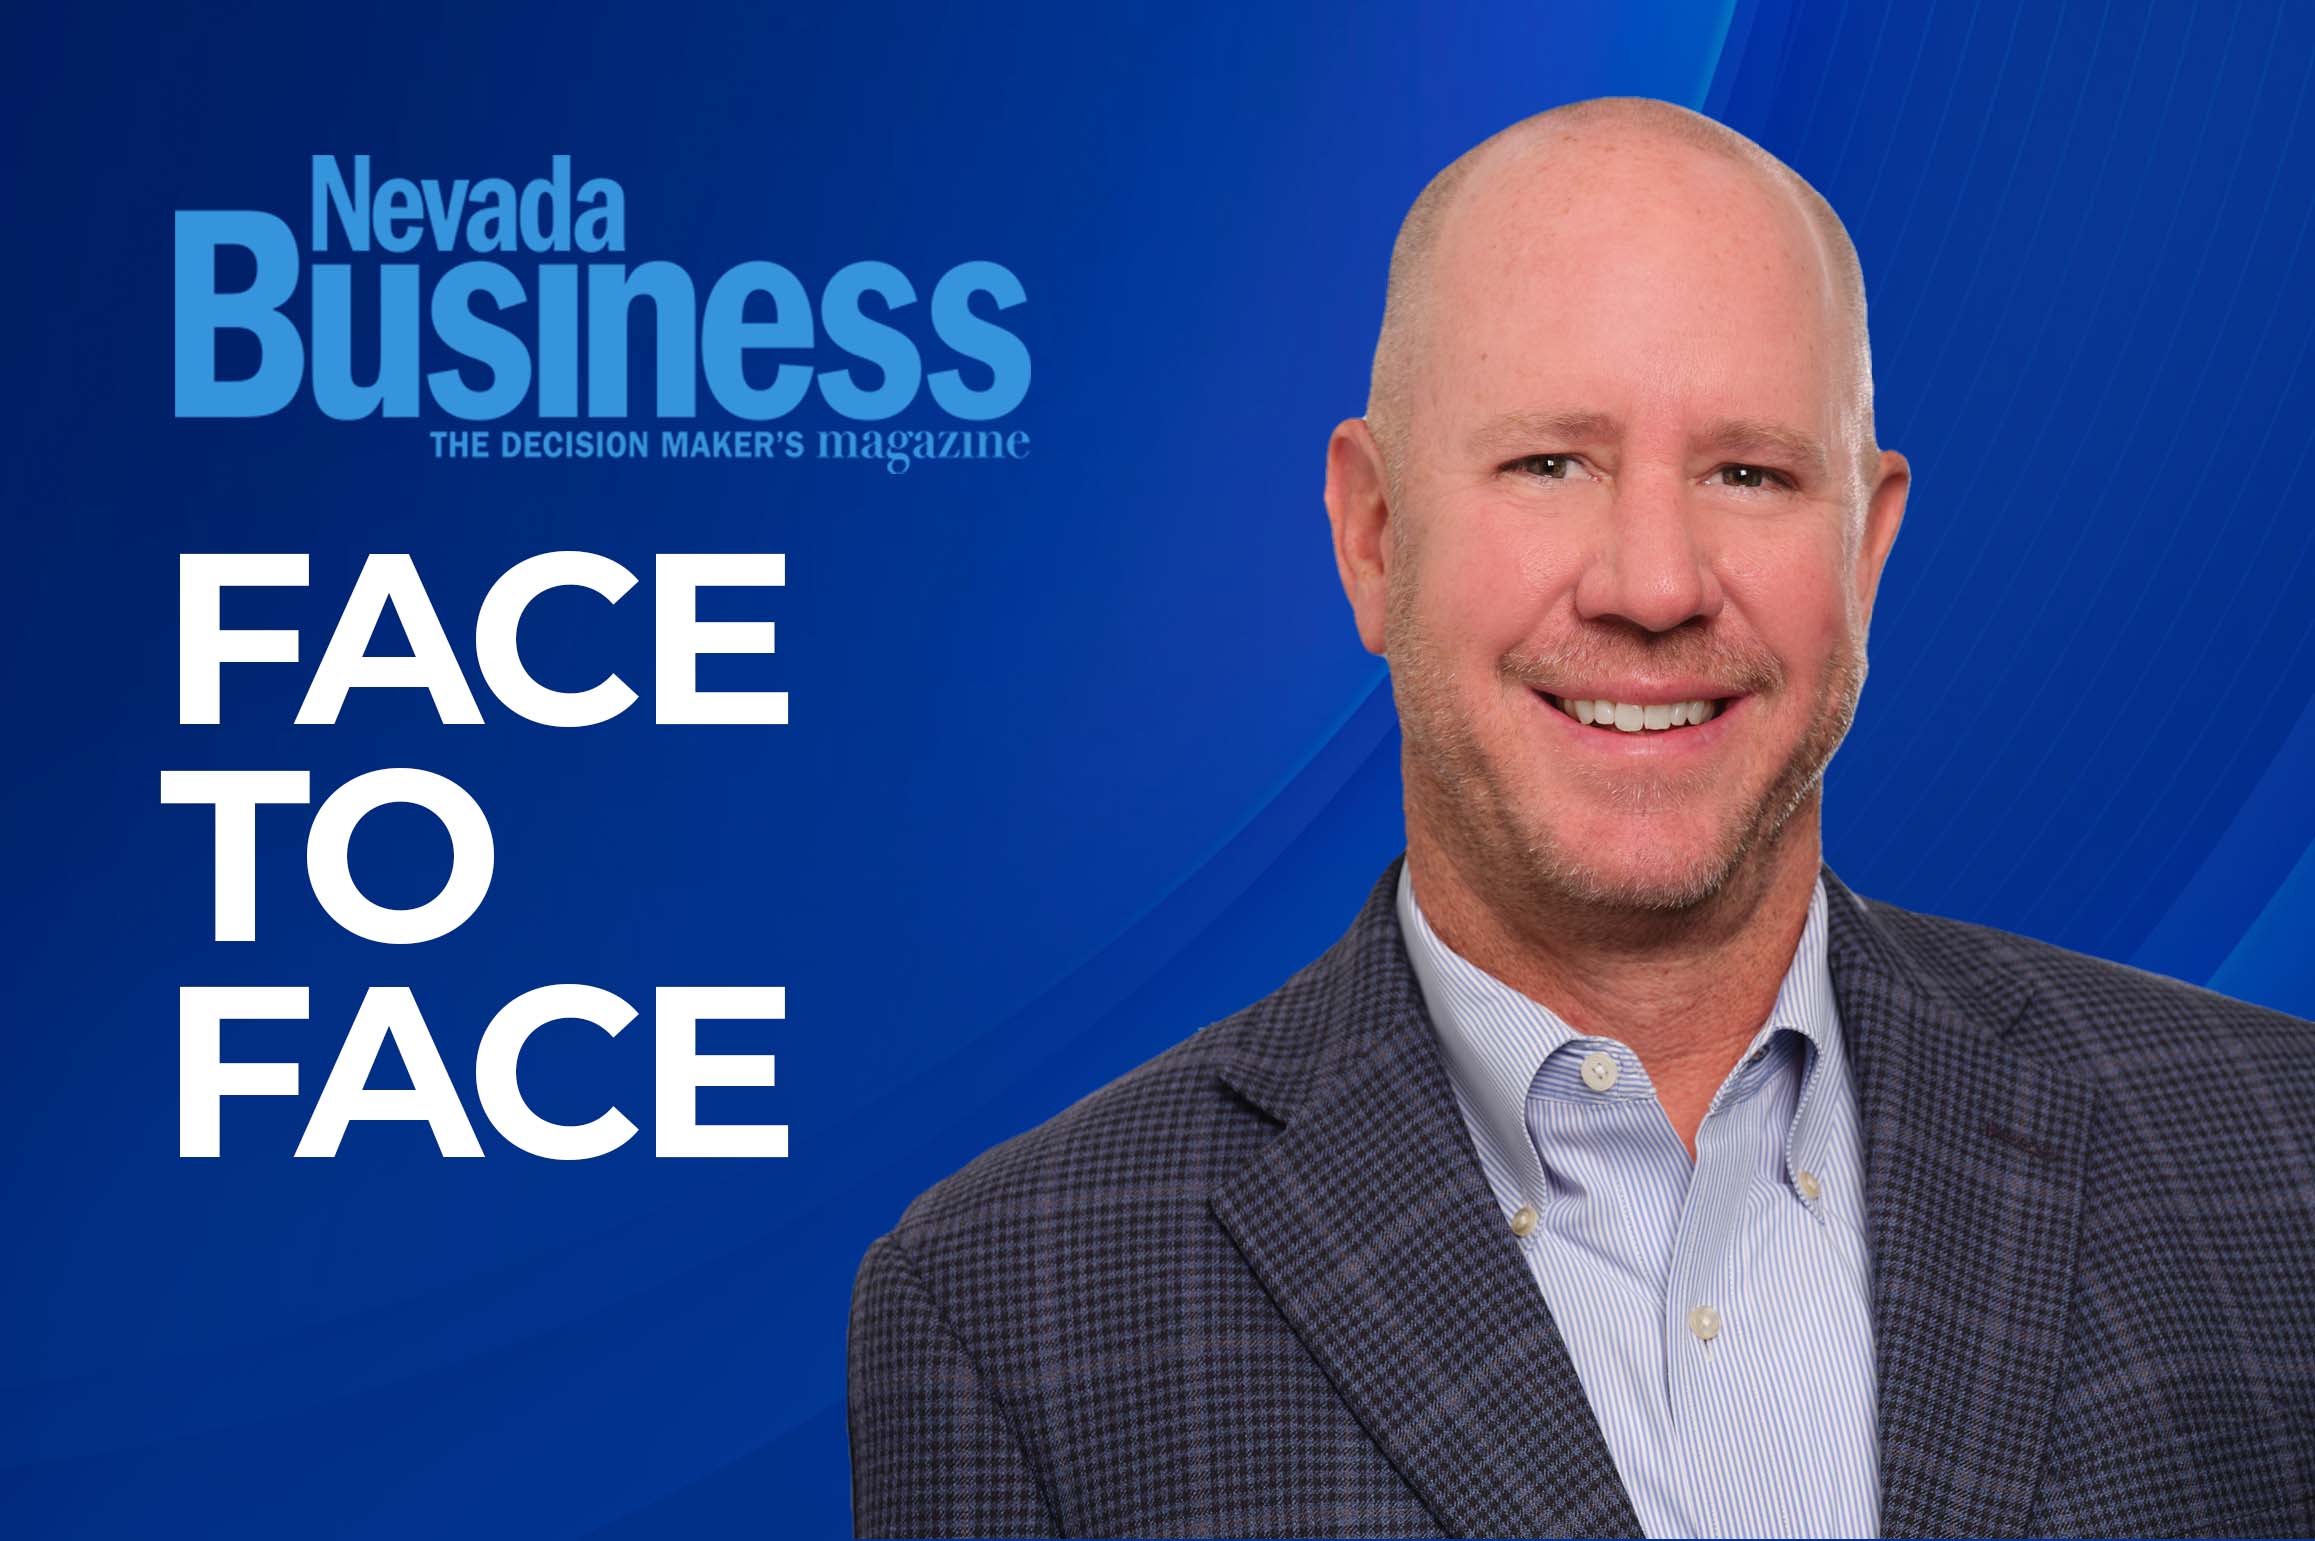 Nevada Business Magazine Face to Face with Bryce Clutts